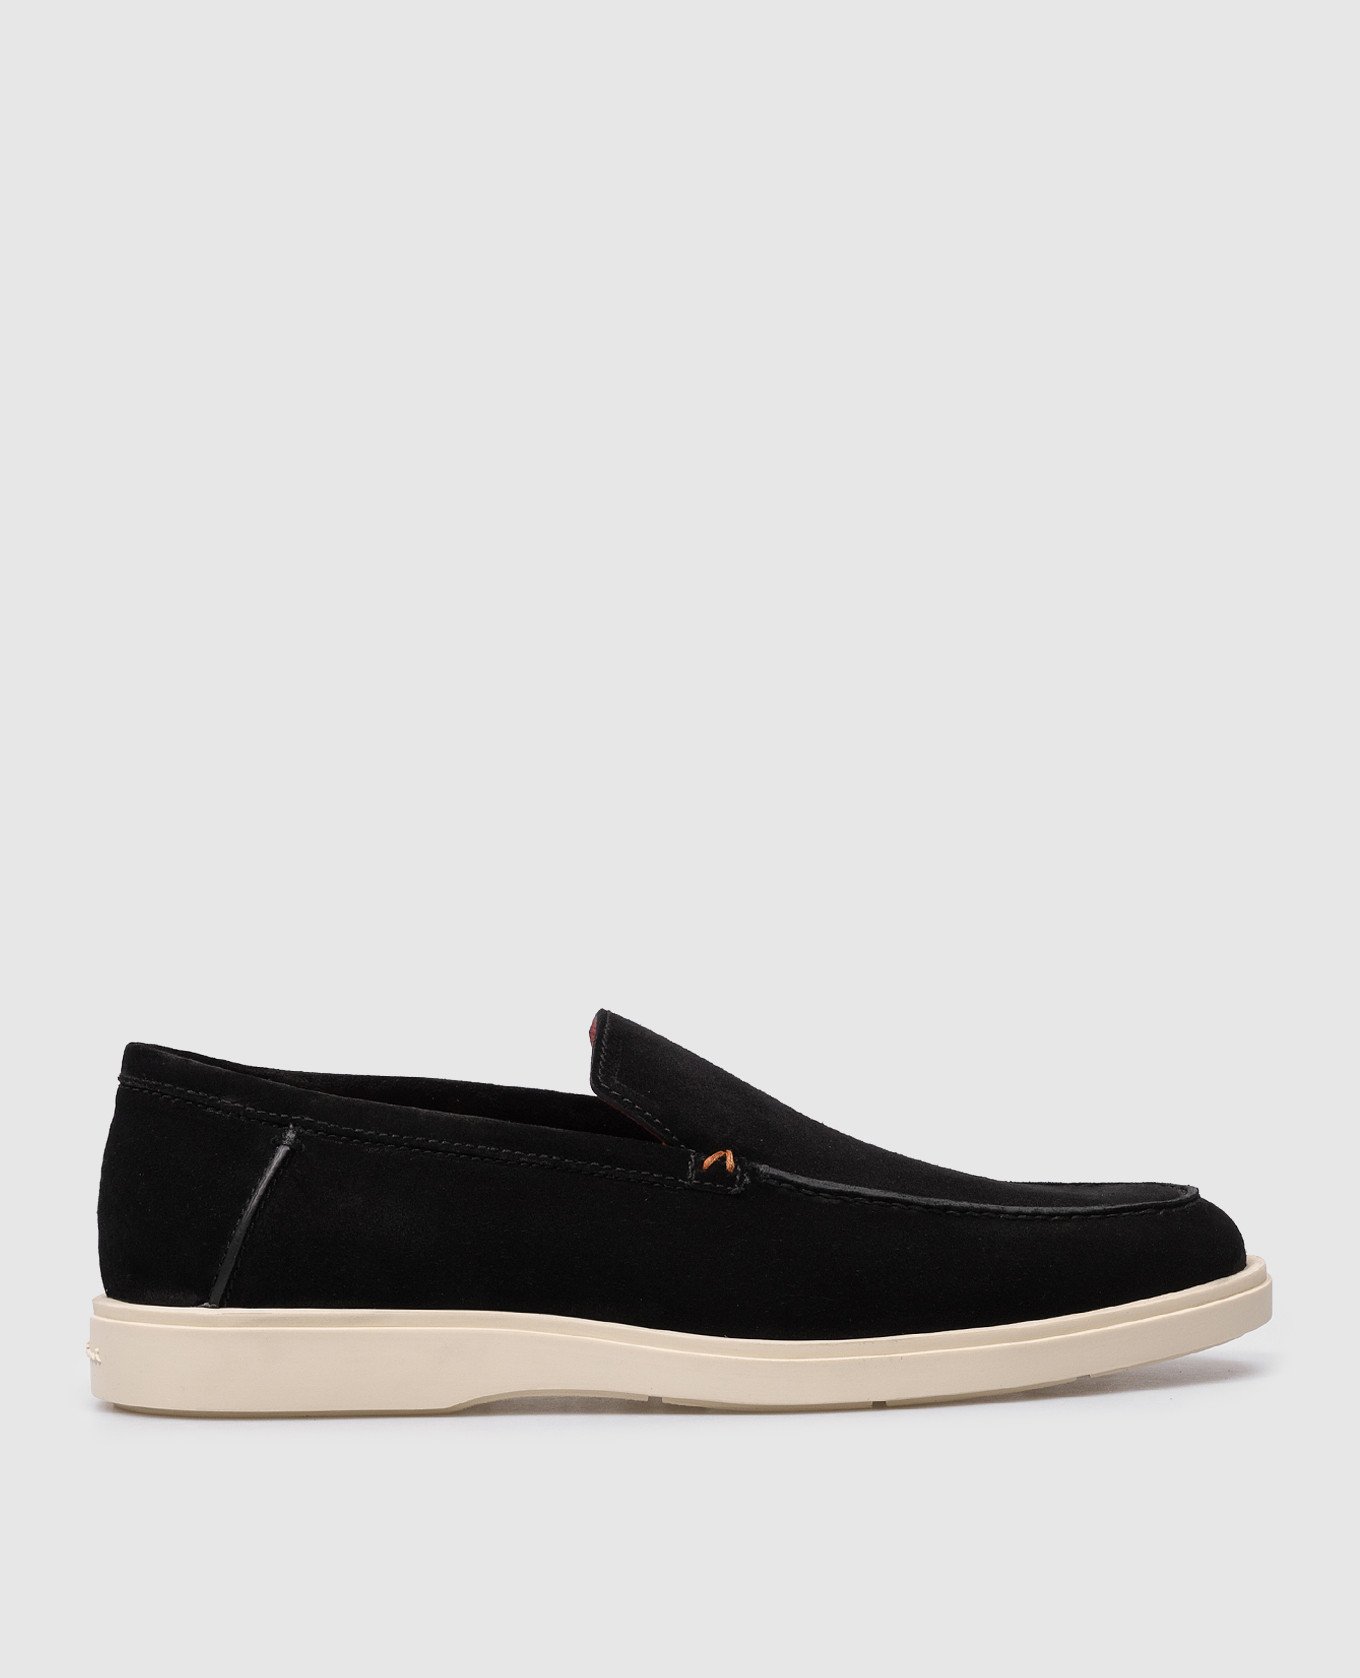 Black suede loafers with logo